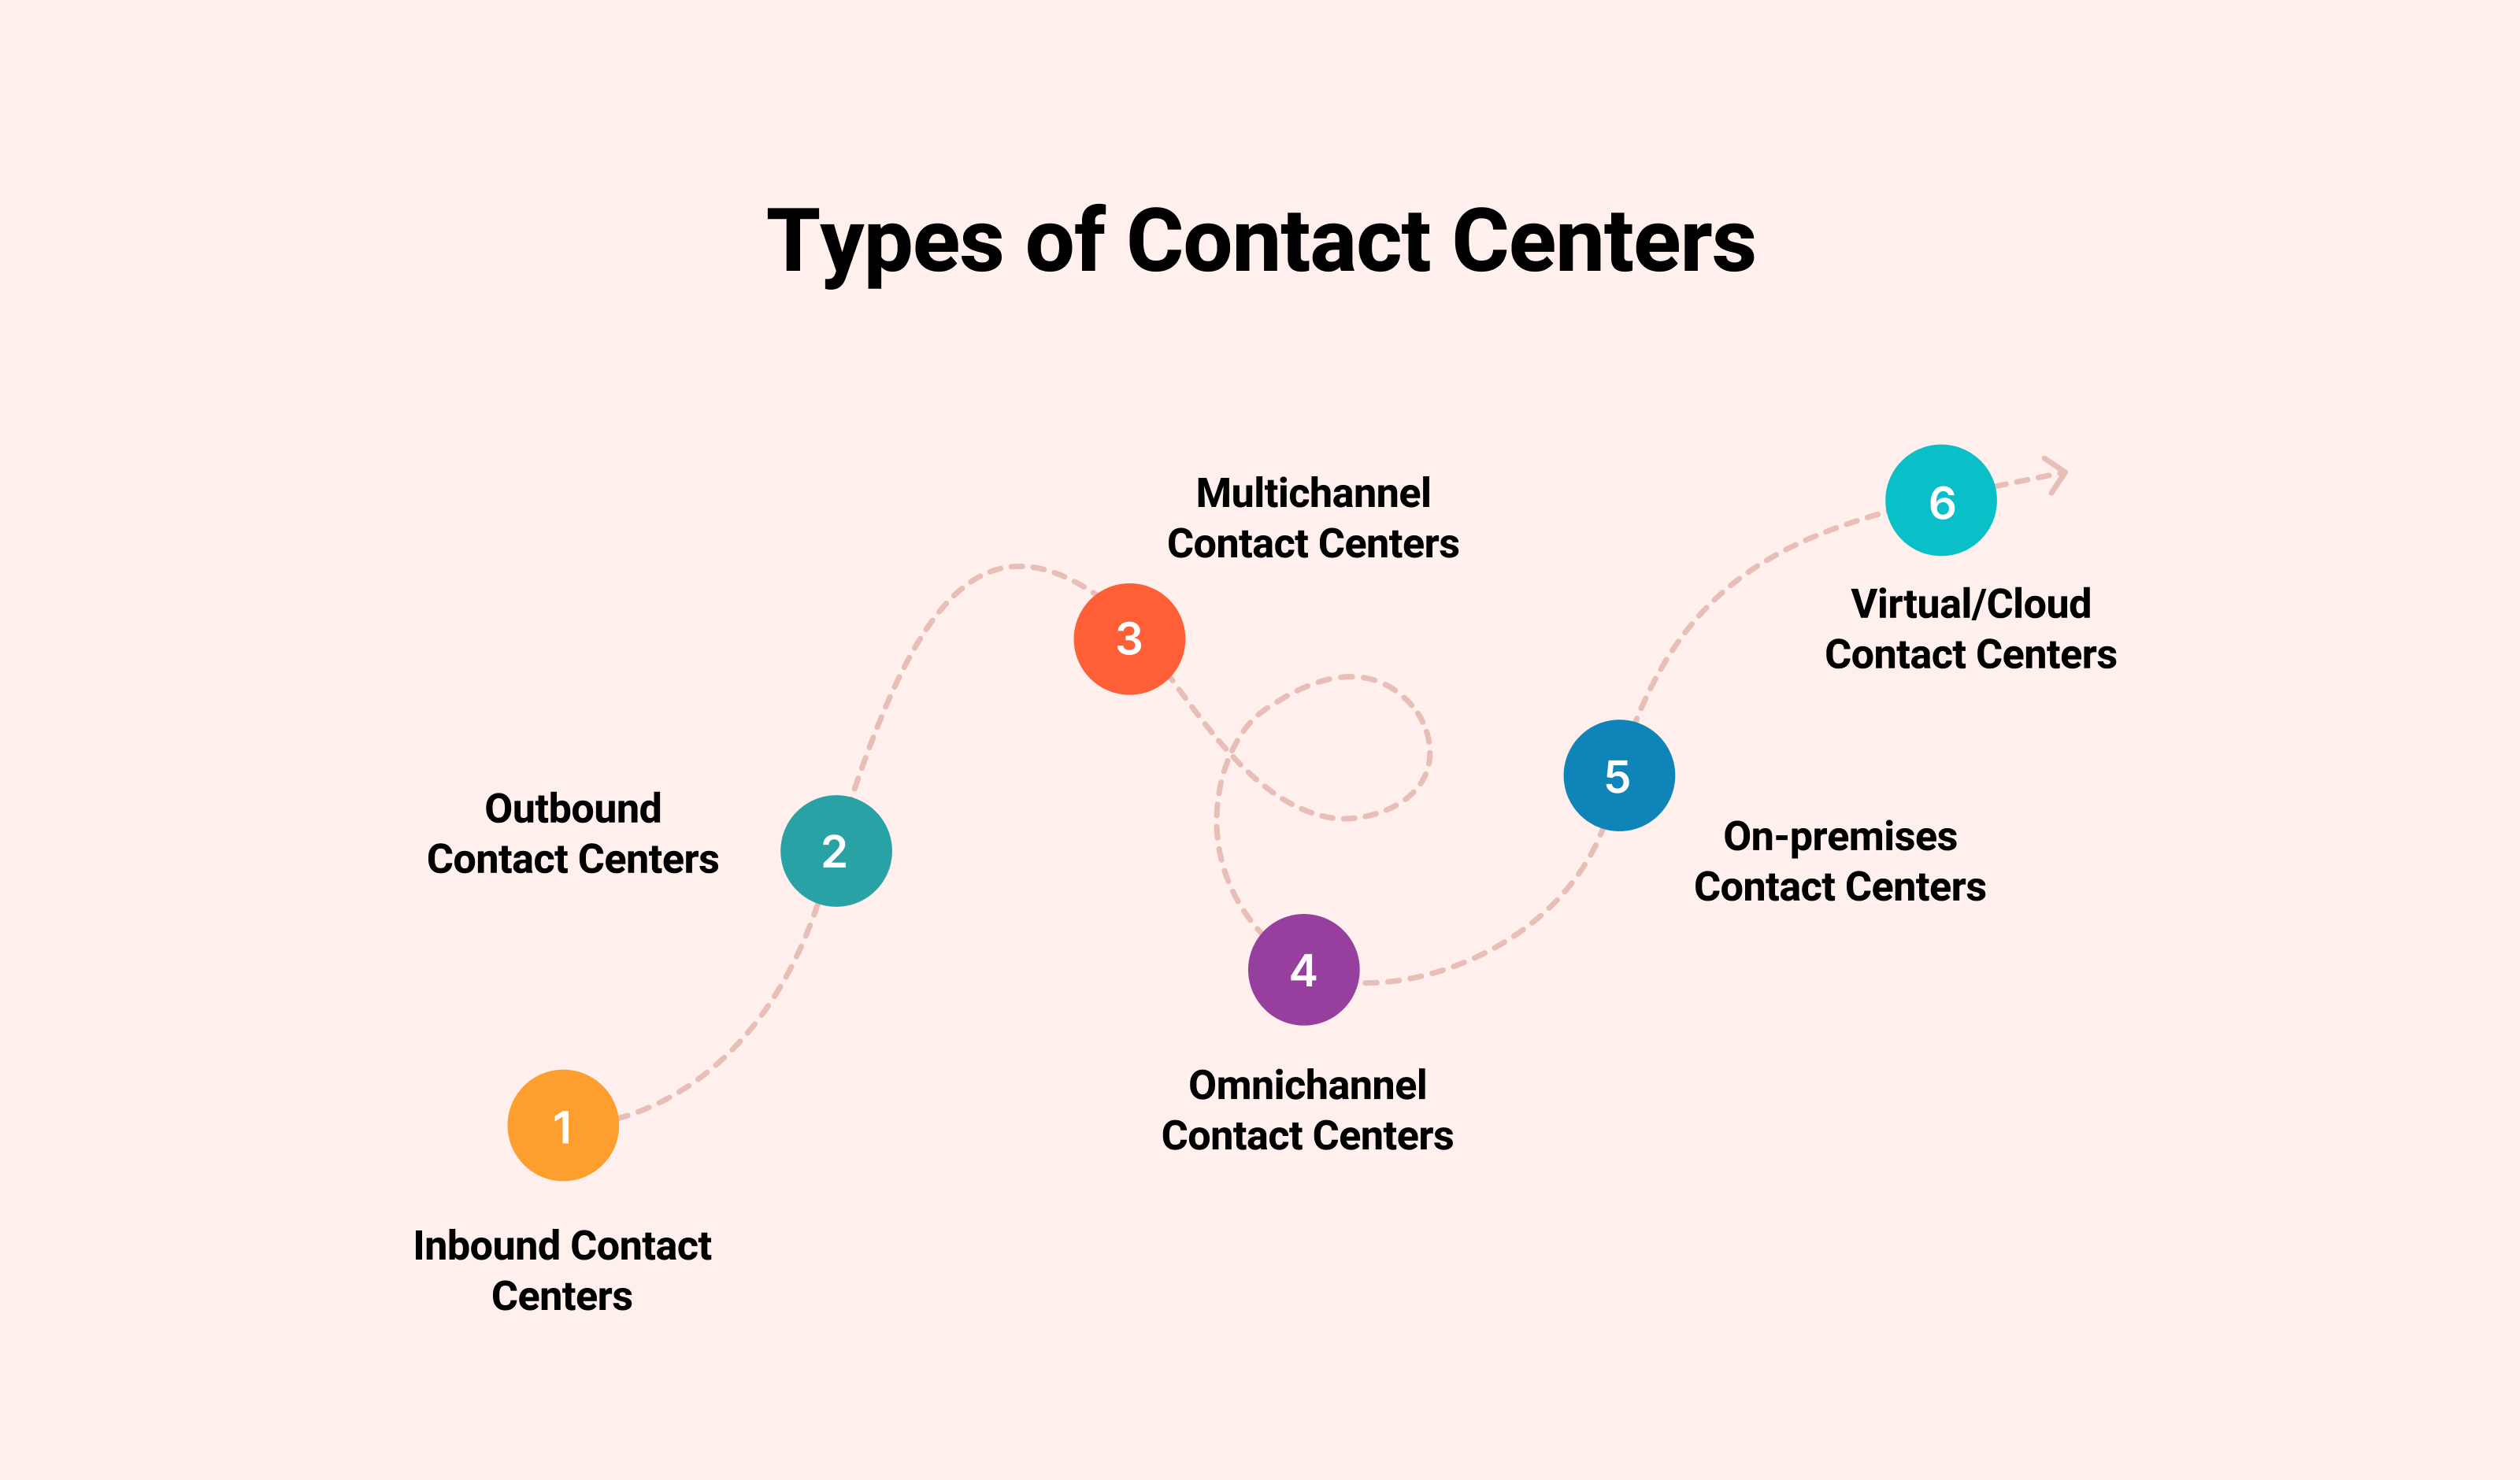 Types of Contact Centers: